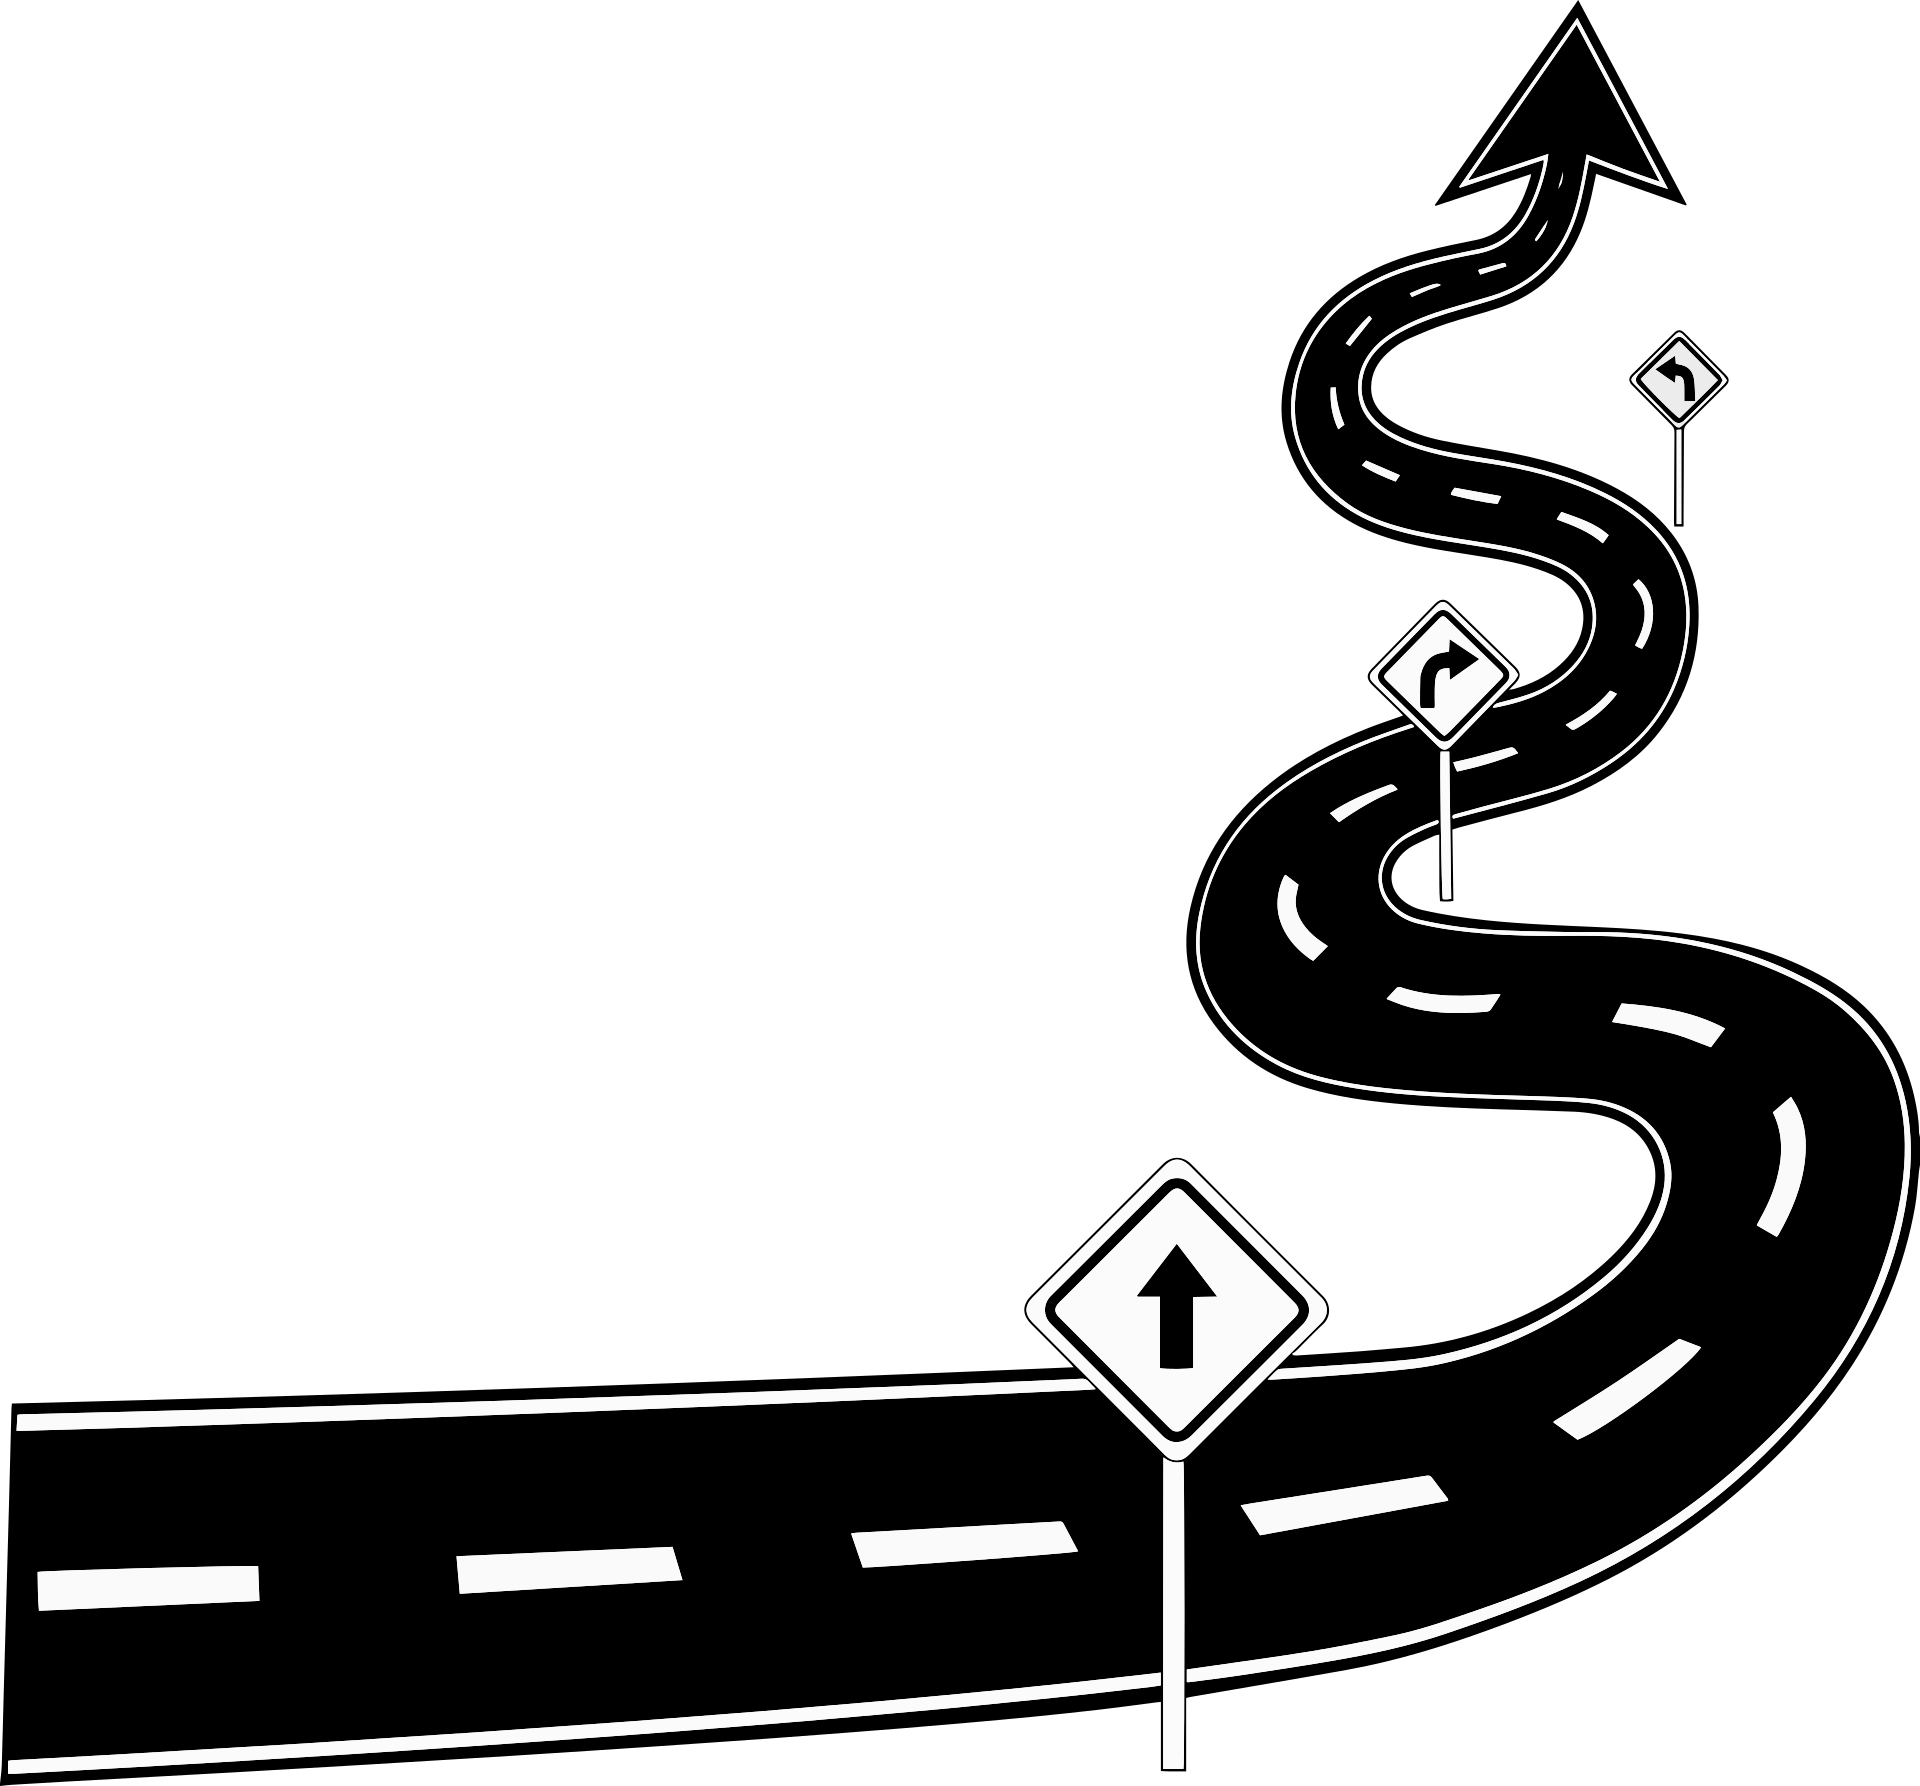 Graphic of a winding road with traffic signs